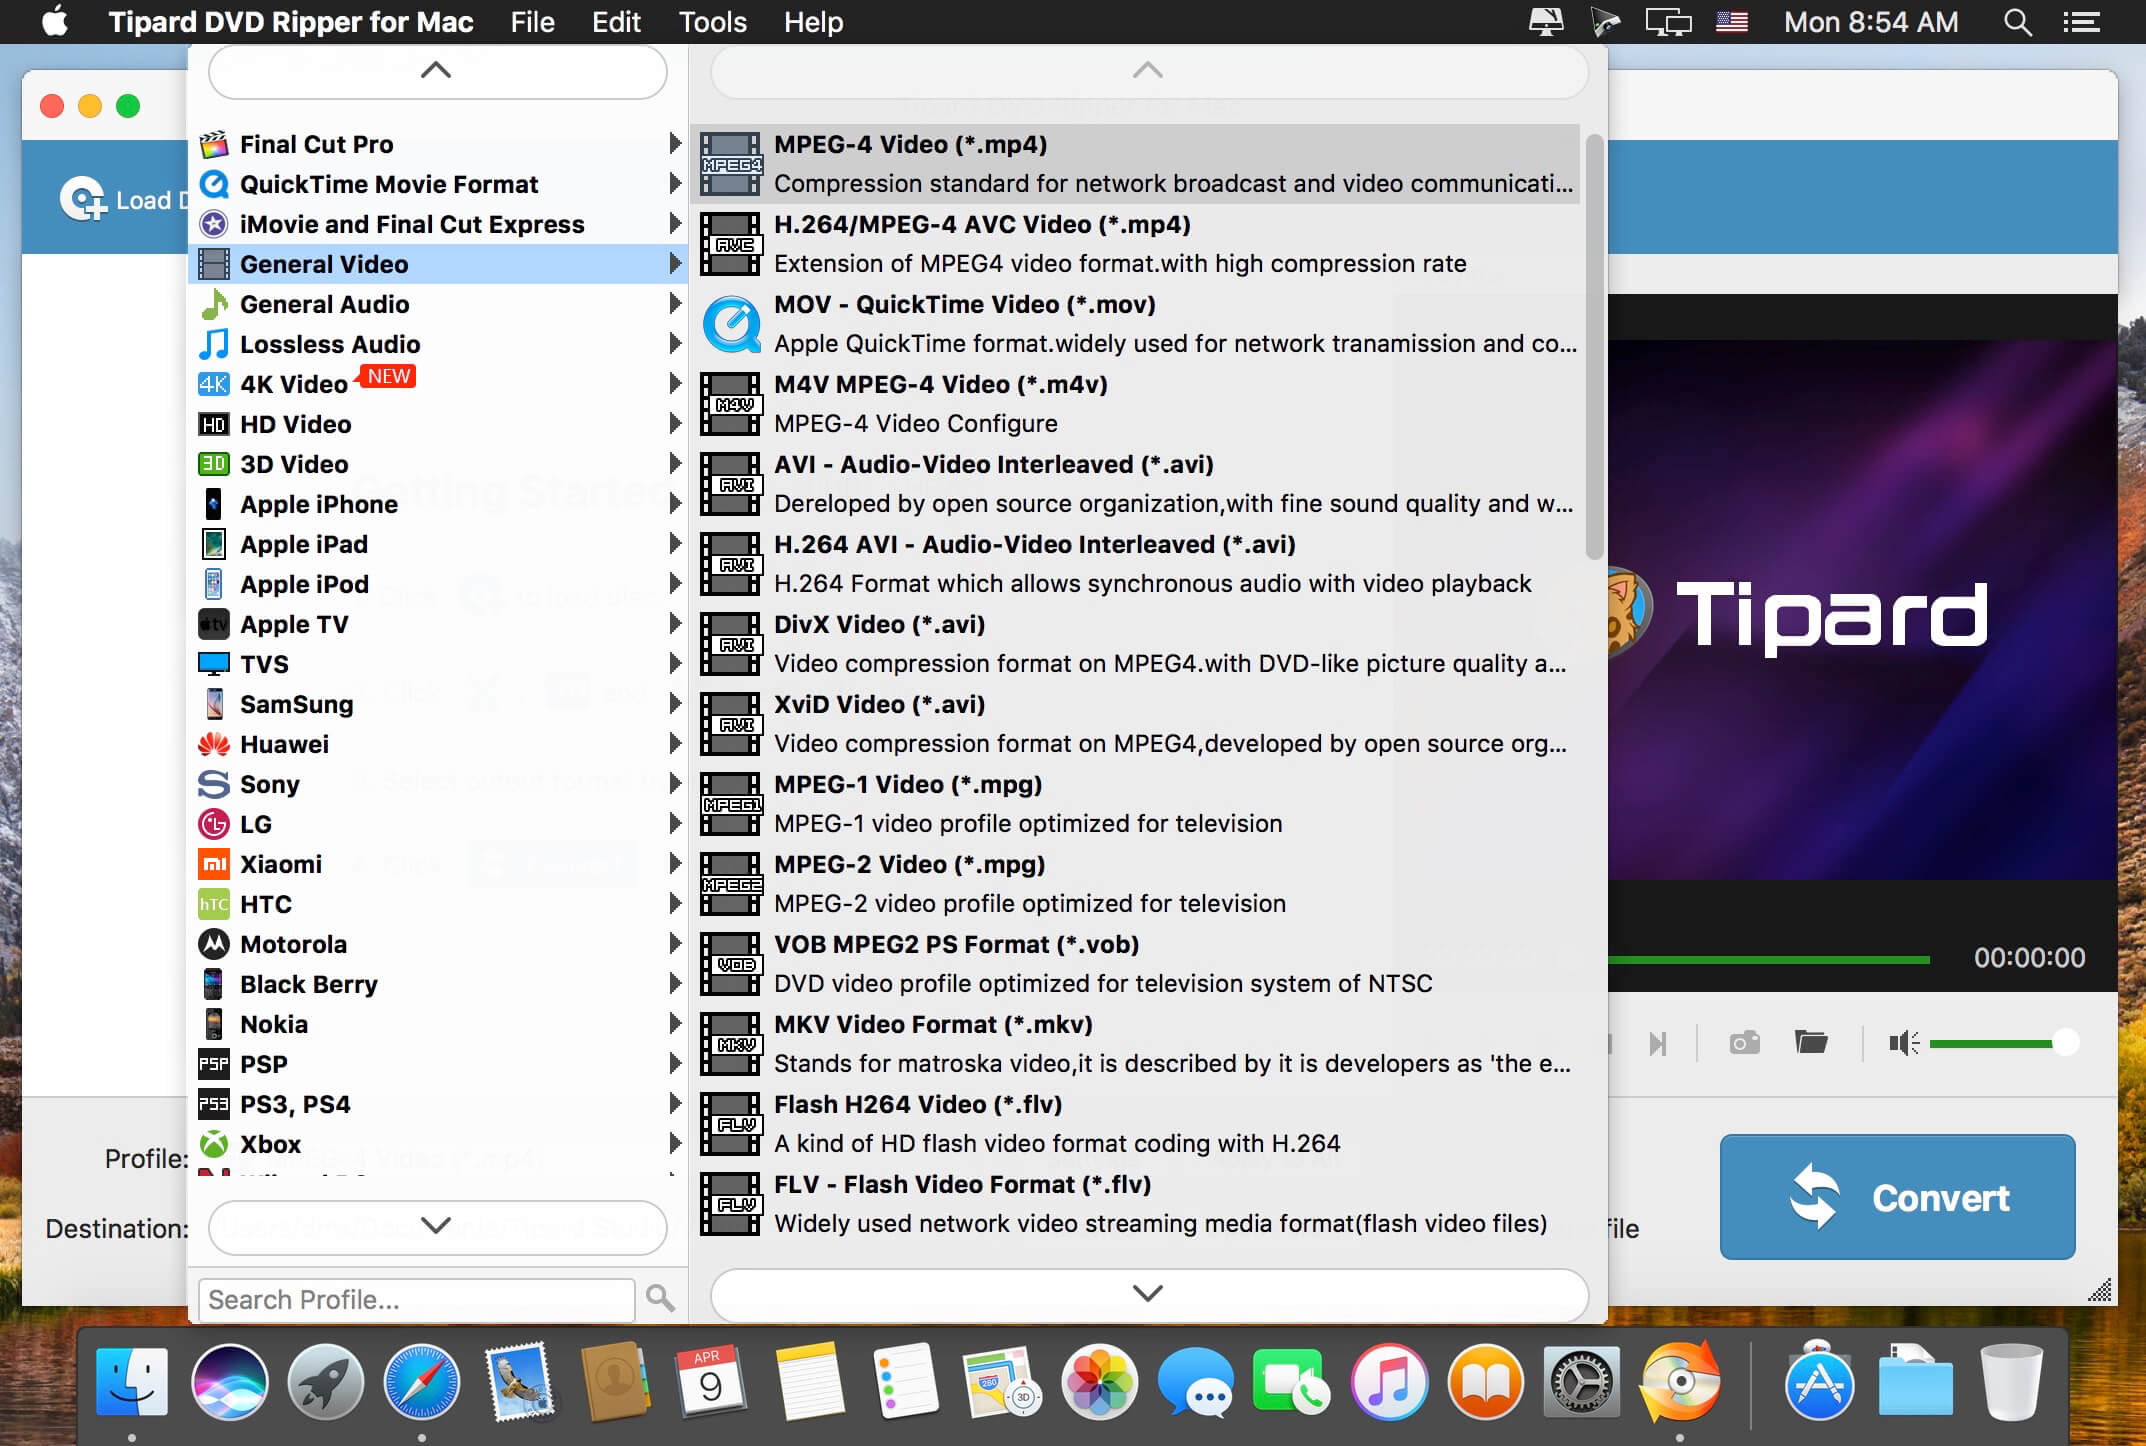 Tipard DVD Ripper 10.0.90 instal the new version for ipod